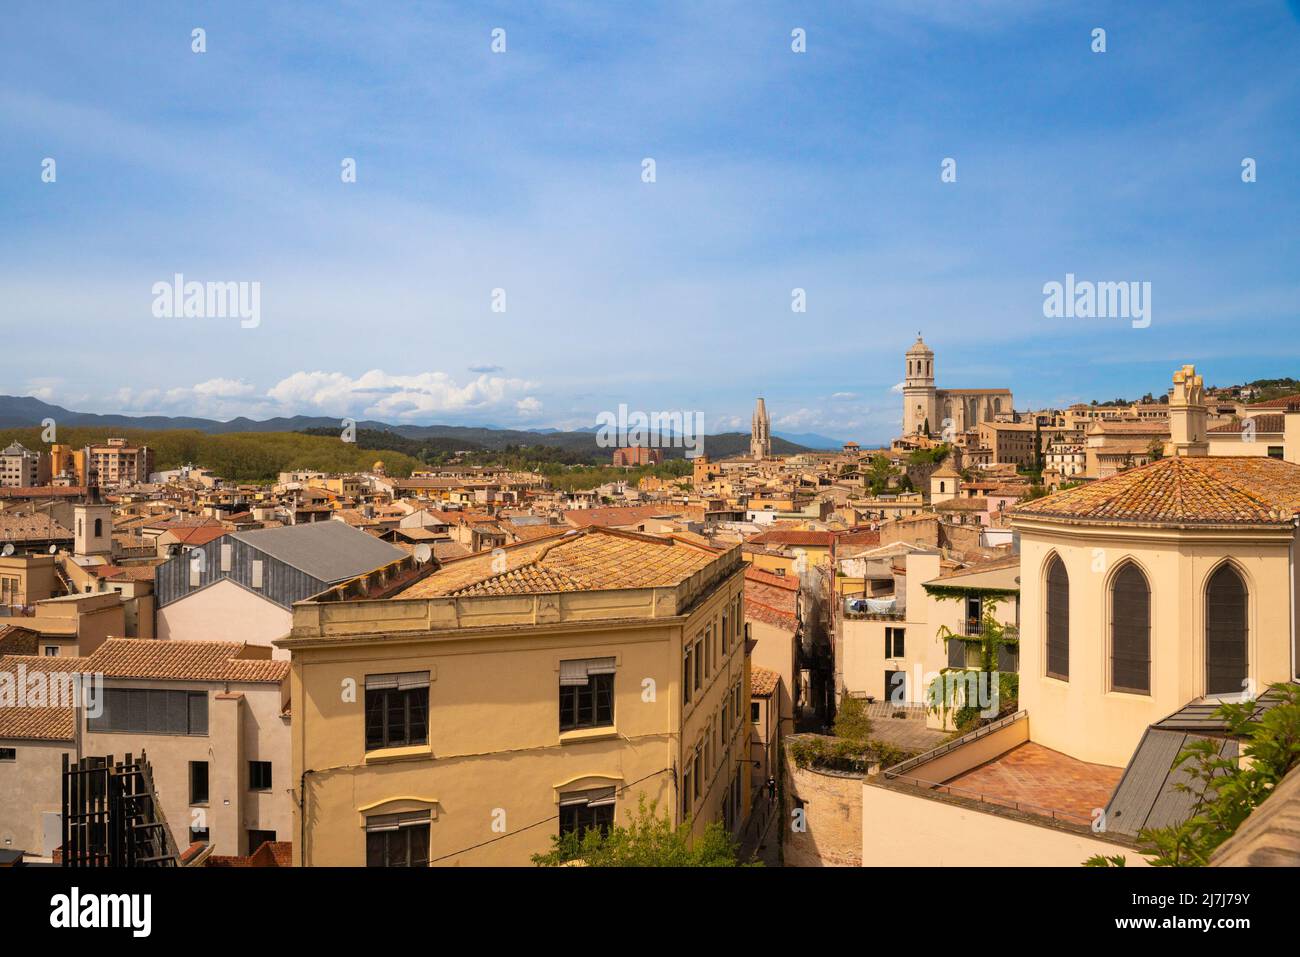 Beautiful Medieval city of Girona Spain seen from high elevation Stock Photo